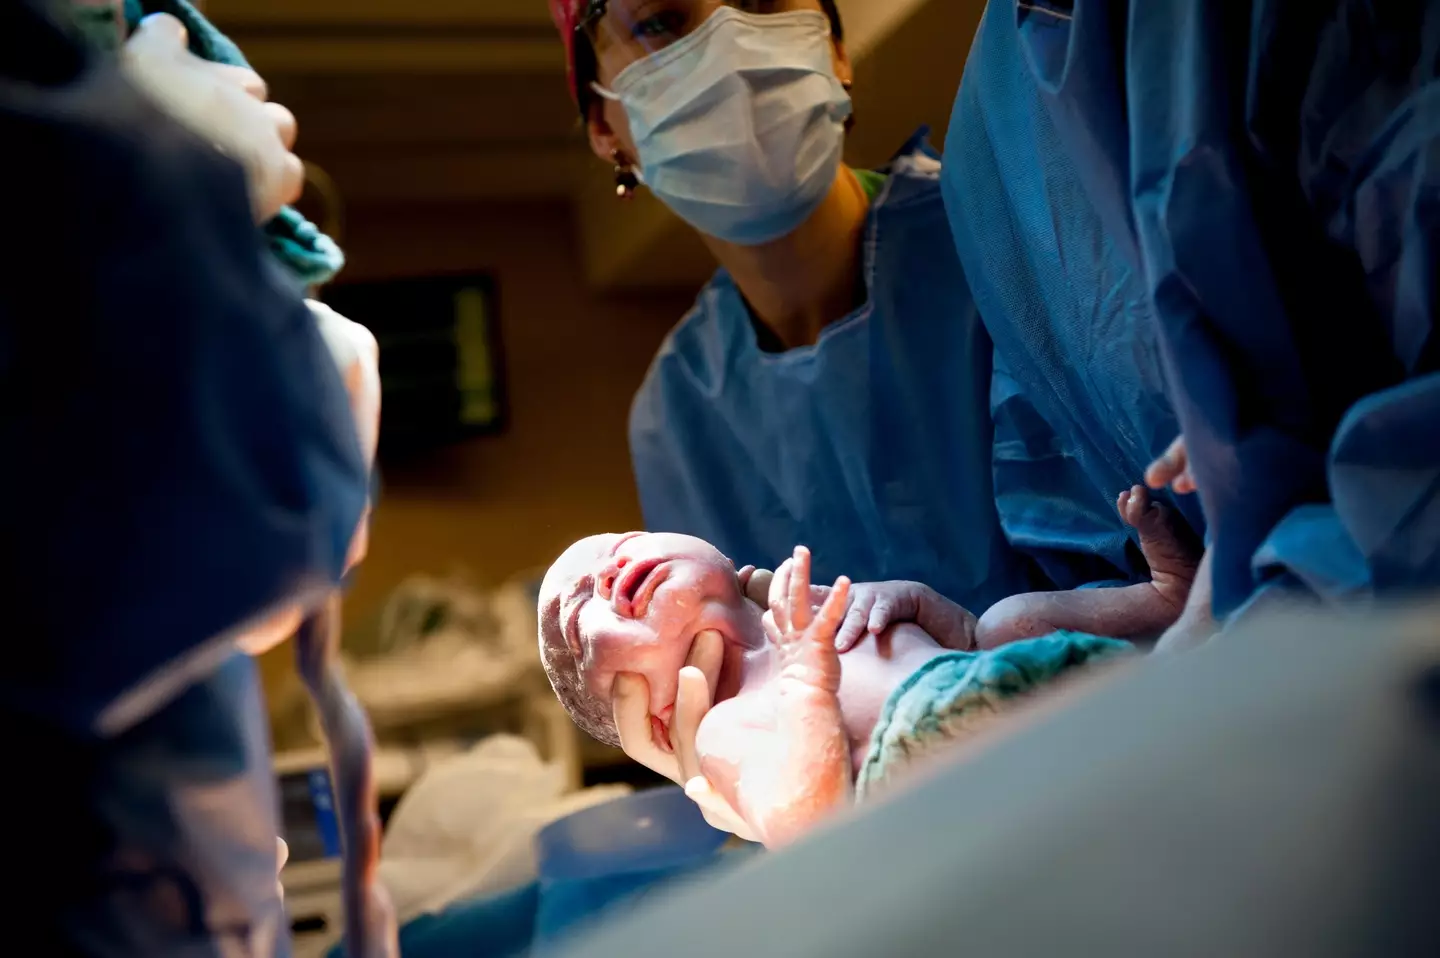 One woman in her class had been booked into having an elective c-section.